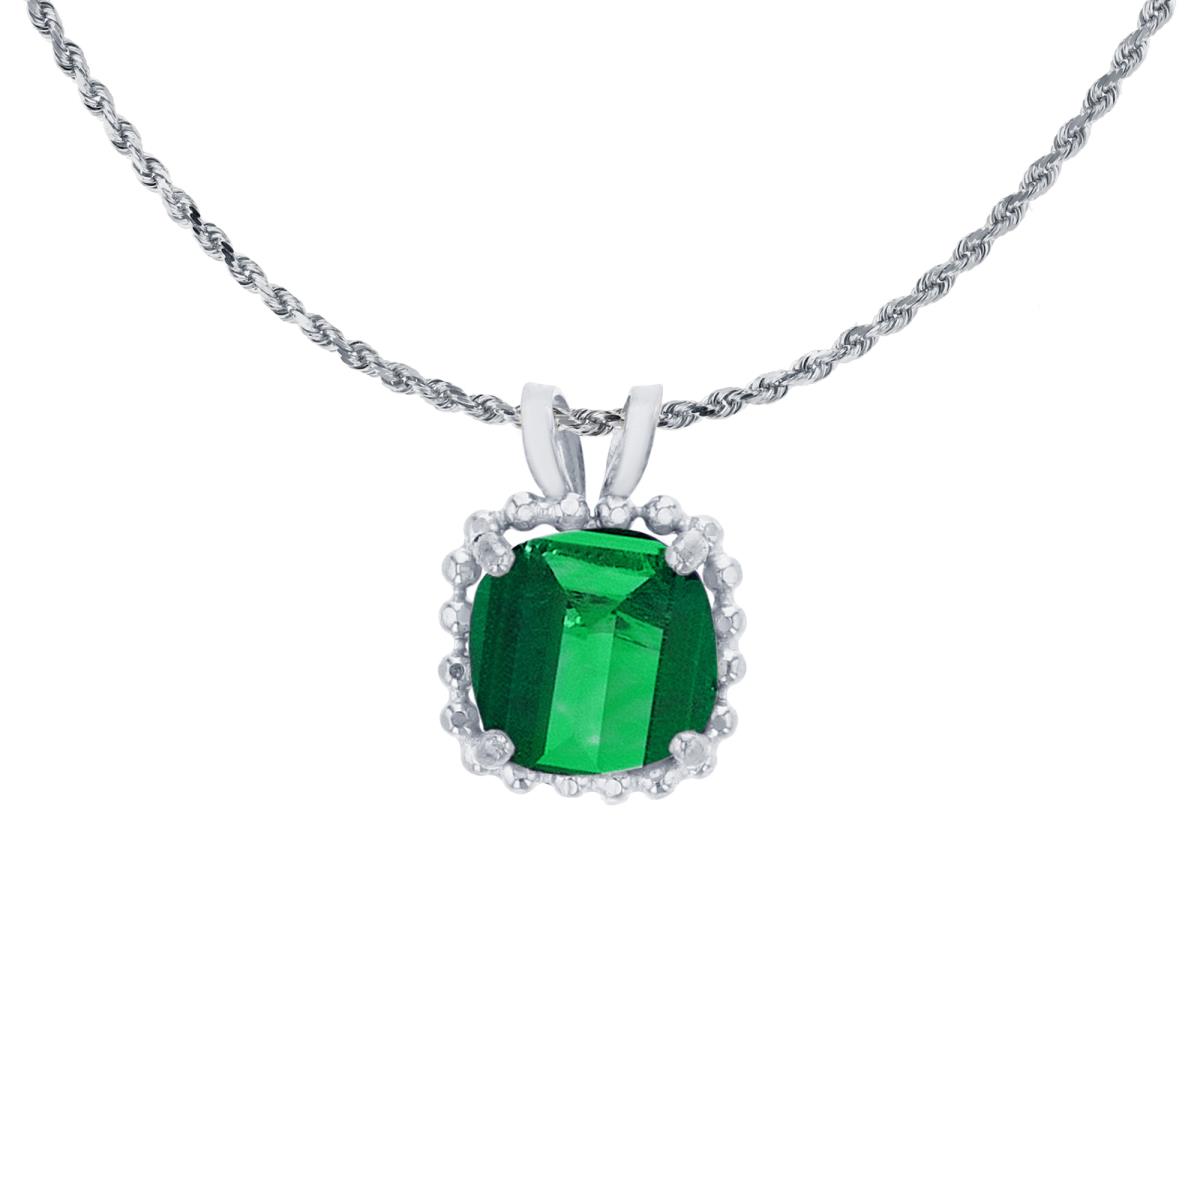 10K White Gold 6mm Cushion Cut Created Emerald Bead Frame Rabbit Ear 18" Rope Chain Necklace